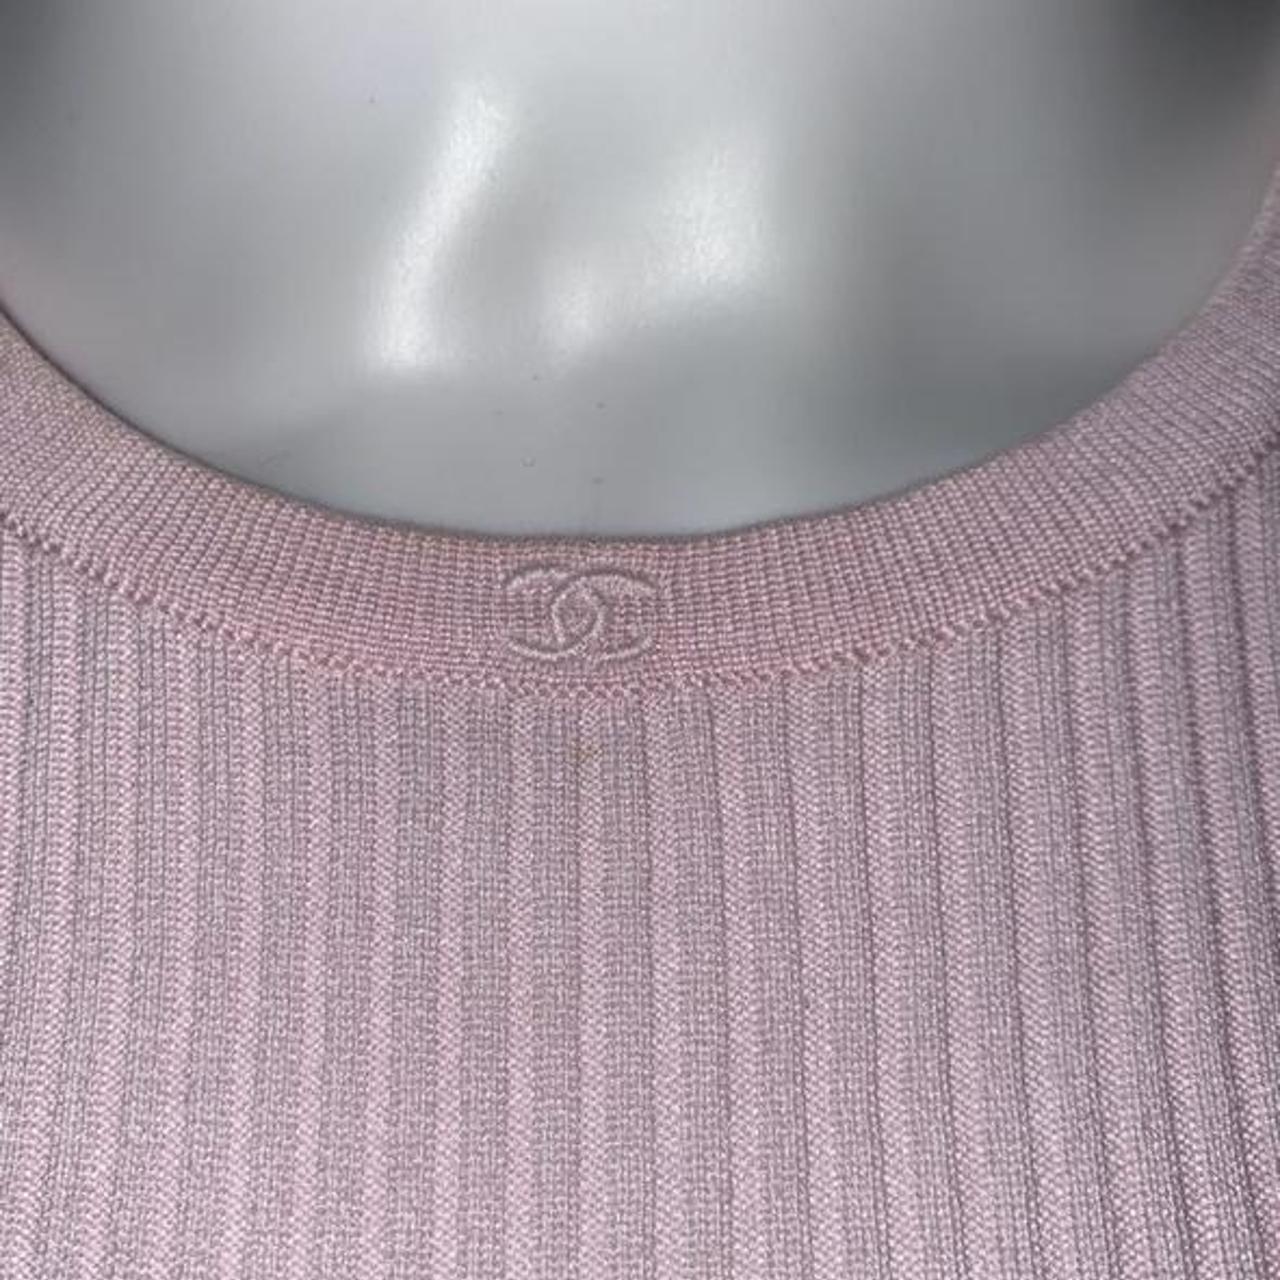 chanel pink top